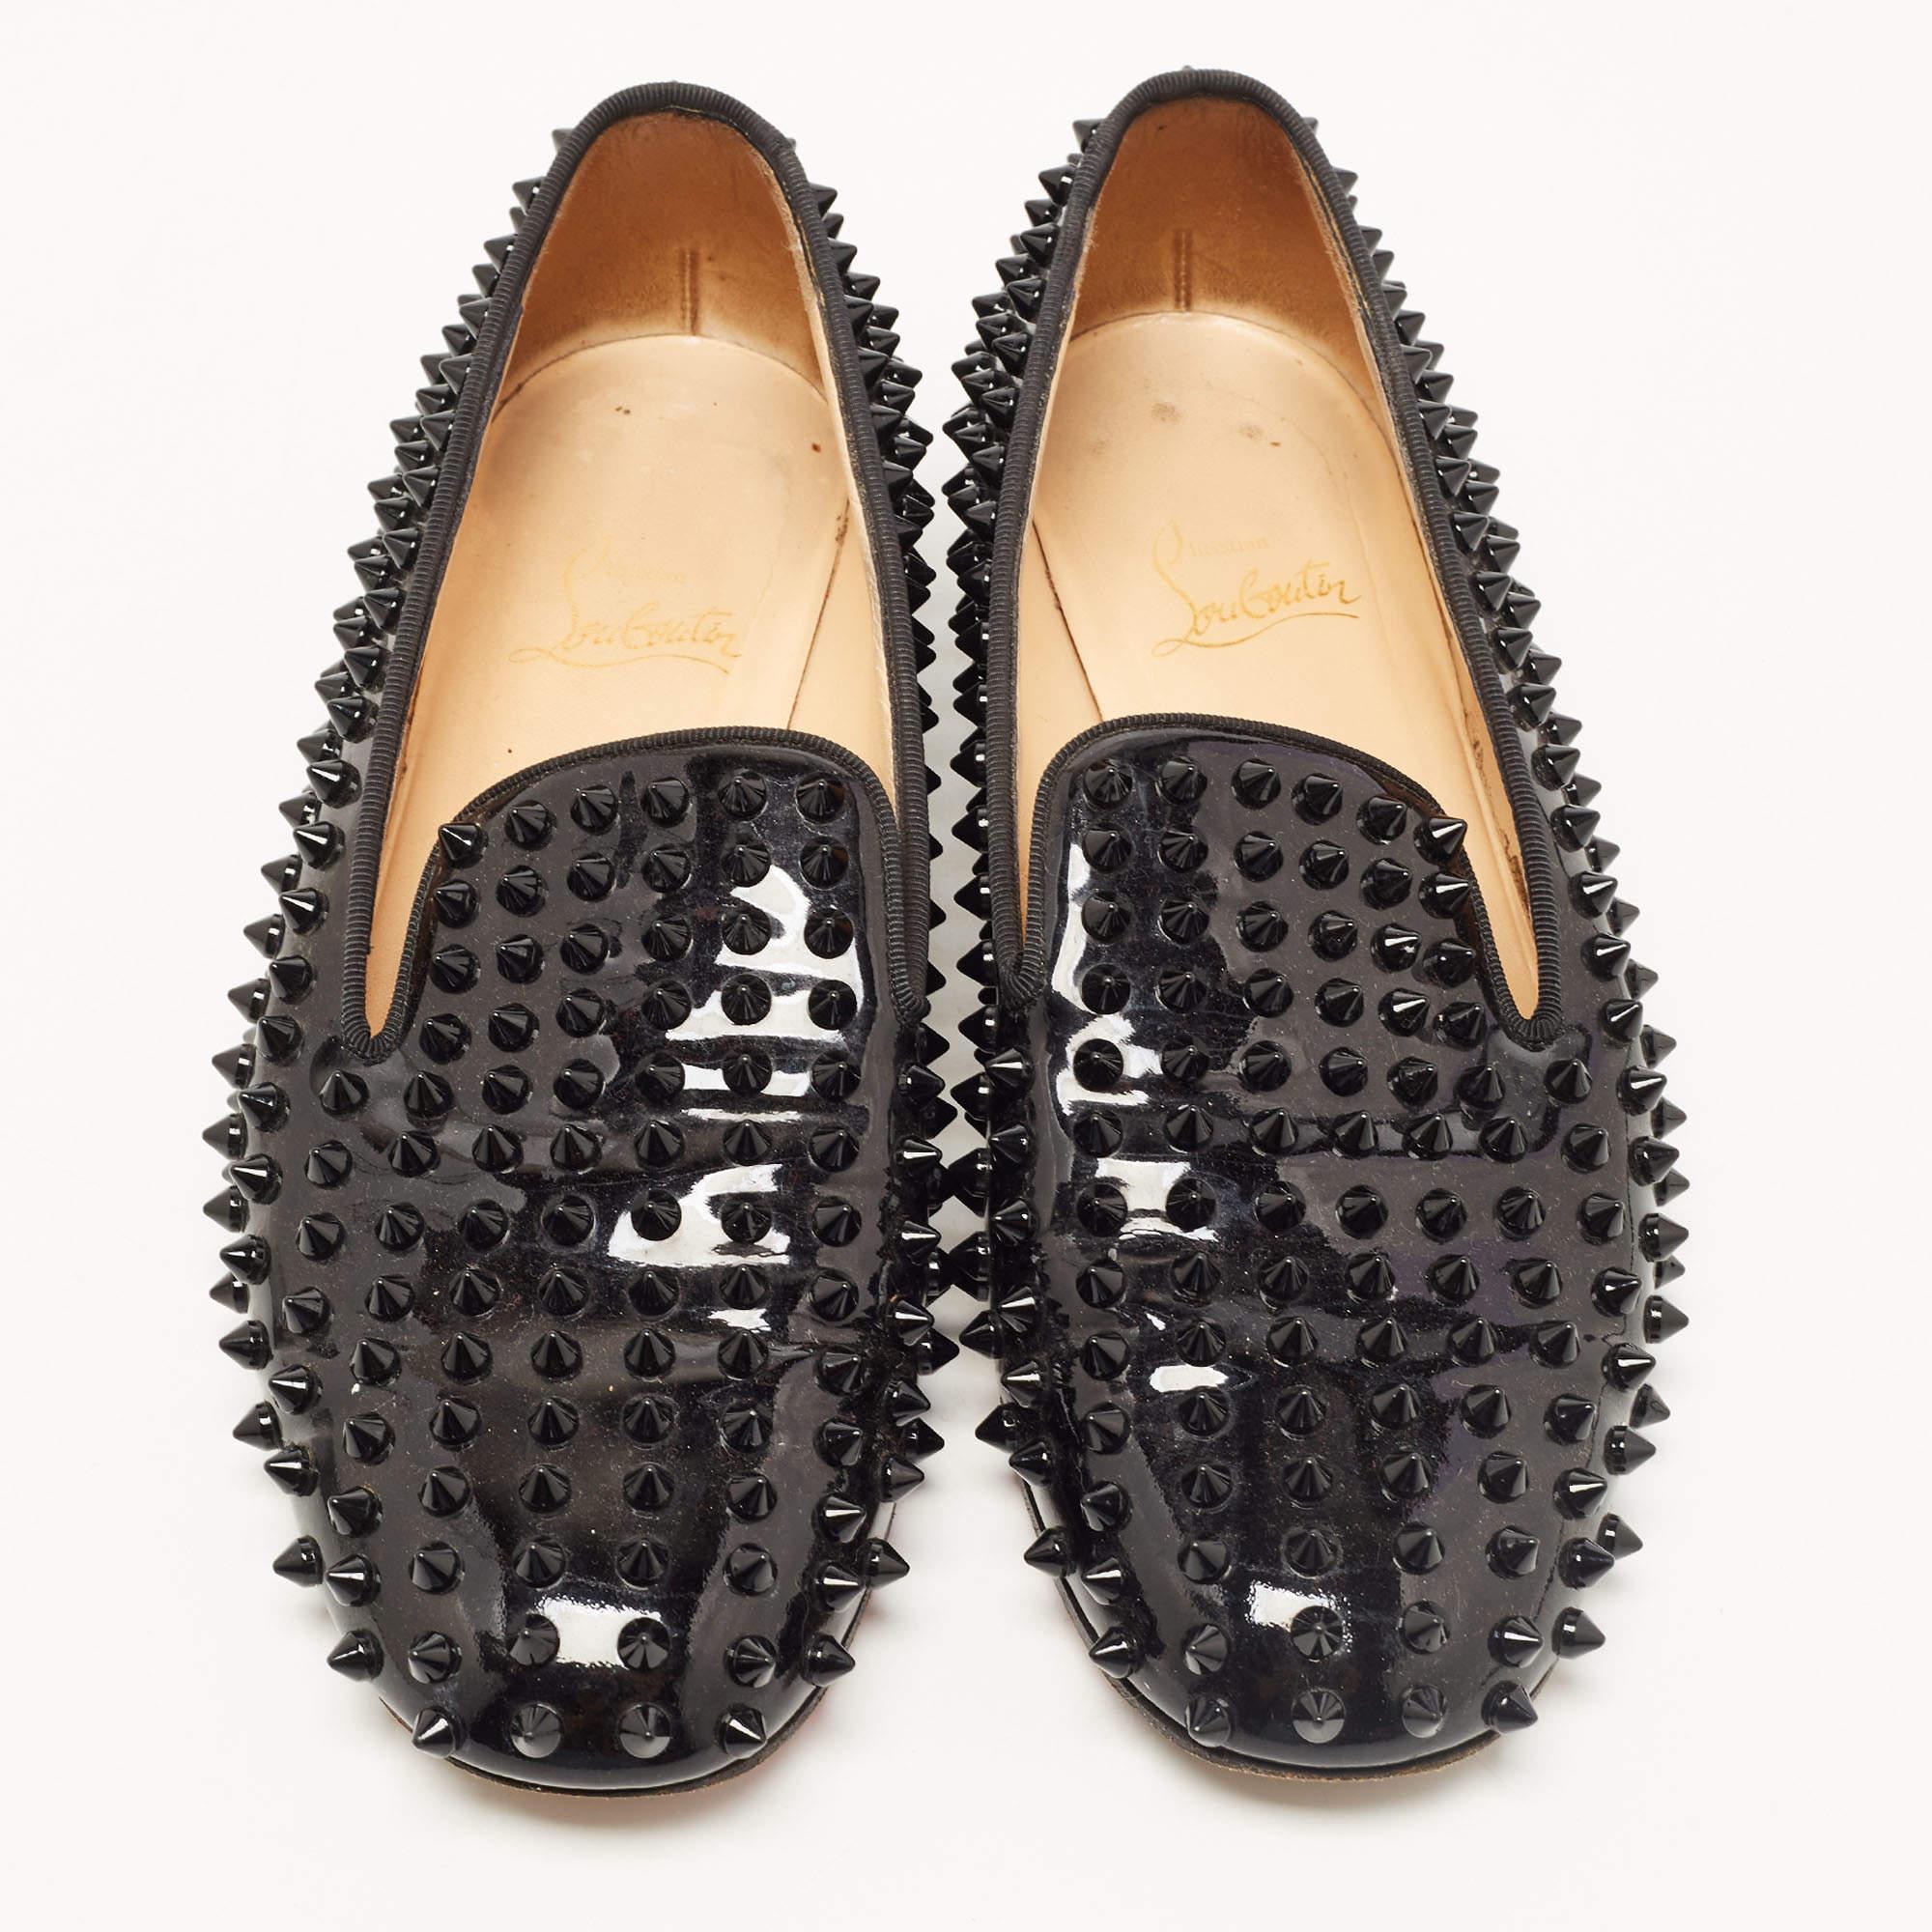 Add a statement appeal to your outfit with these Christian Louboutin slippers. Made from premium materials, they feature spikes, round toes, and red soles.

Includes
Original Dustbag